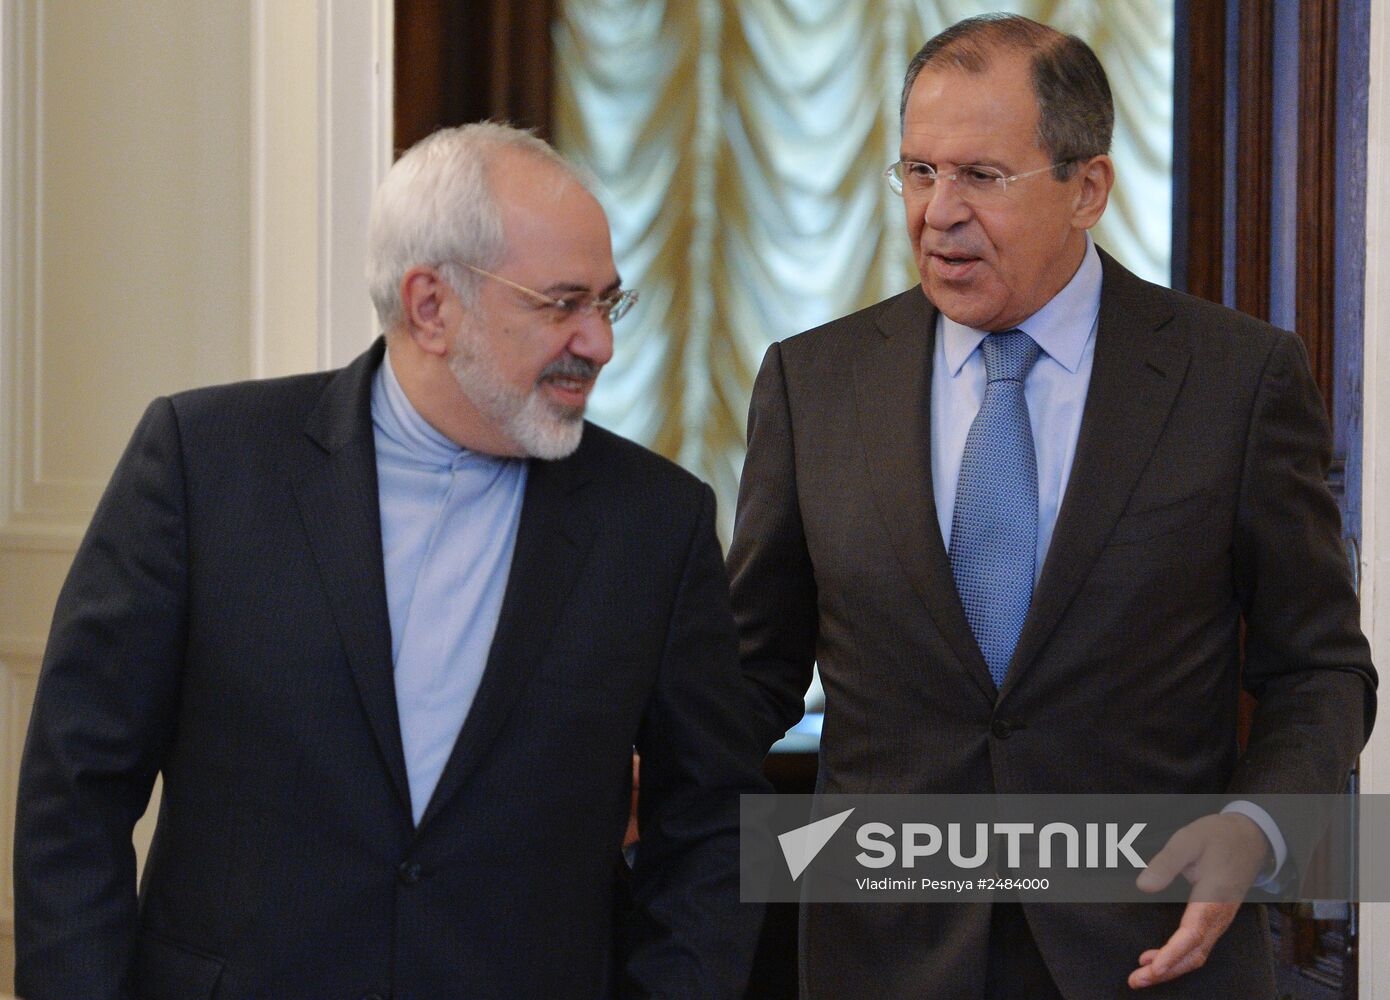 Foreign Minister Sergei Lavrov meets with Iranian counterpart